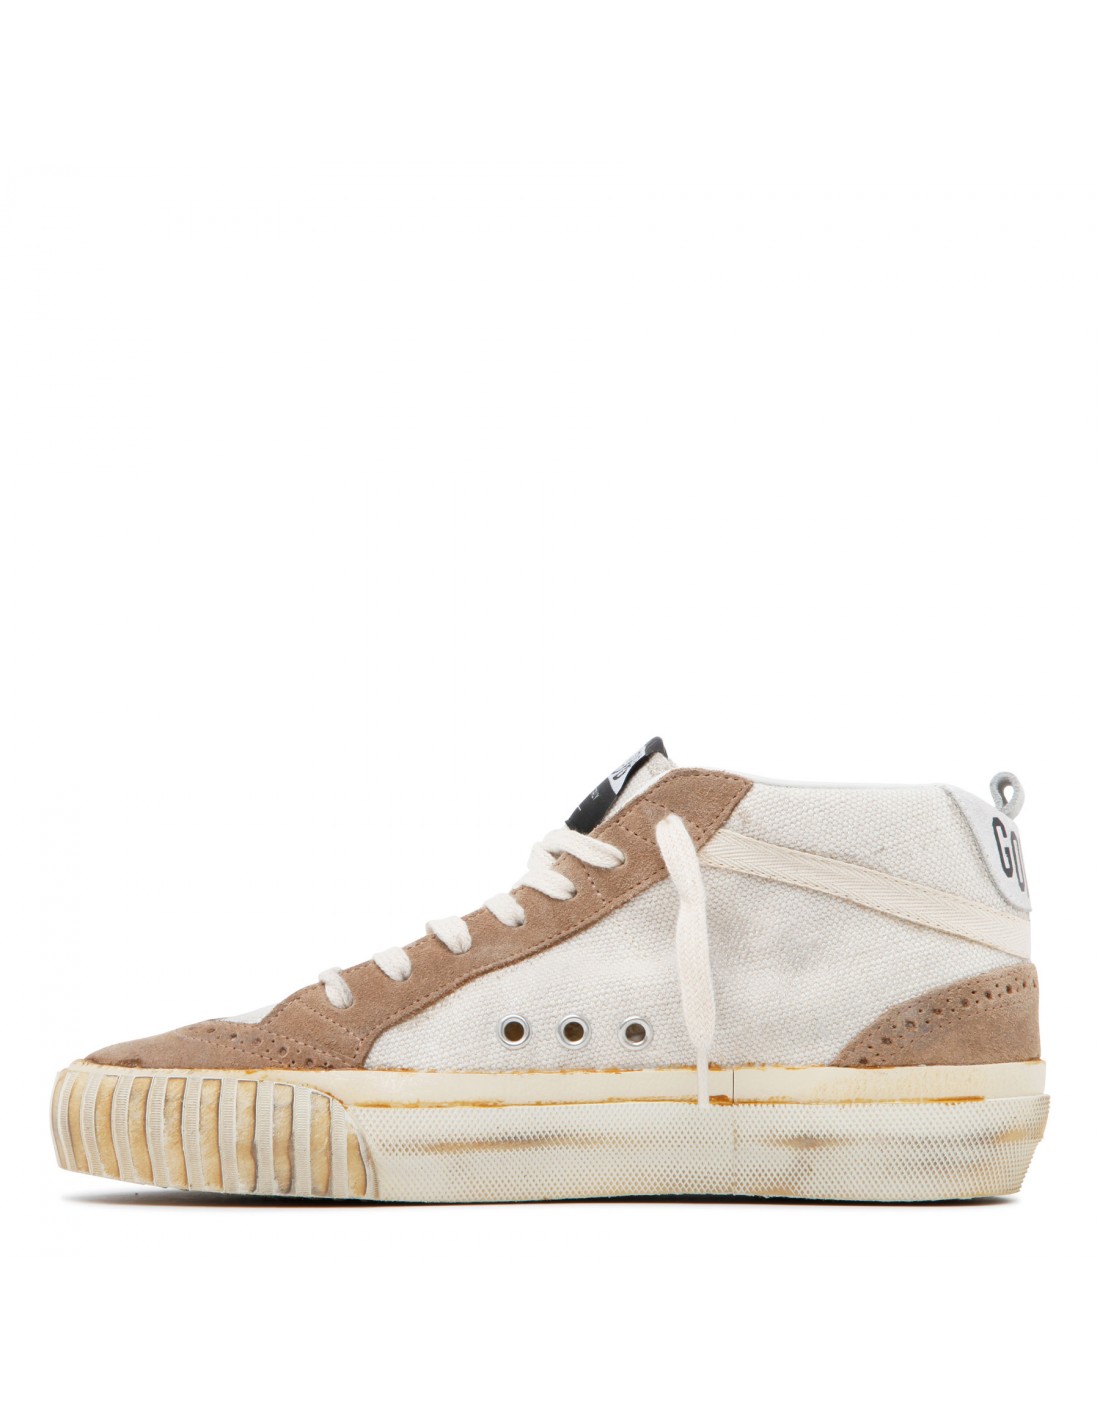 Mid-Star white and tobacco sneakers